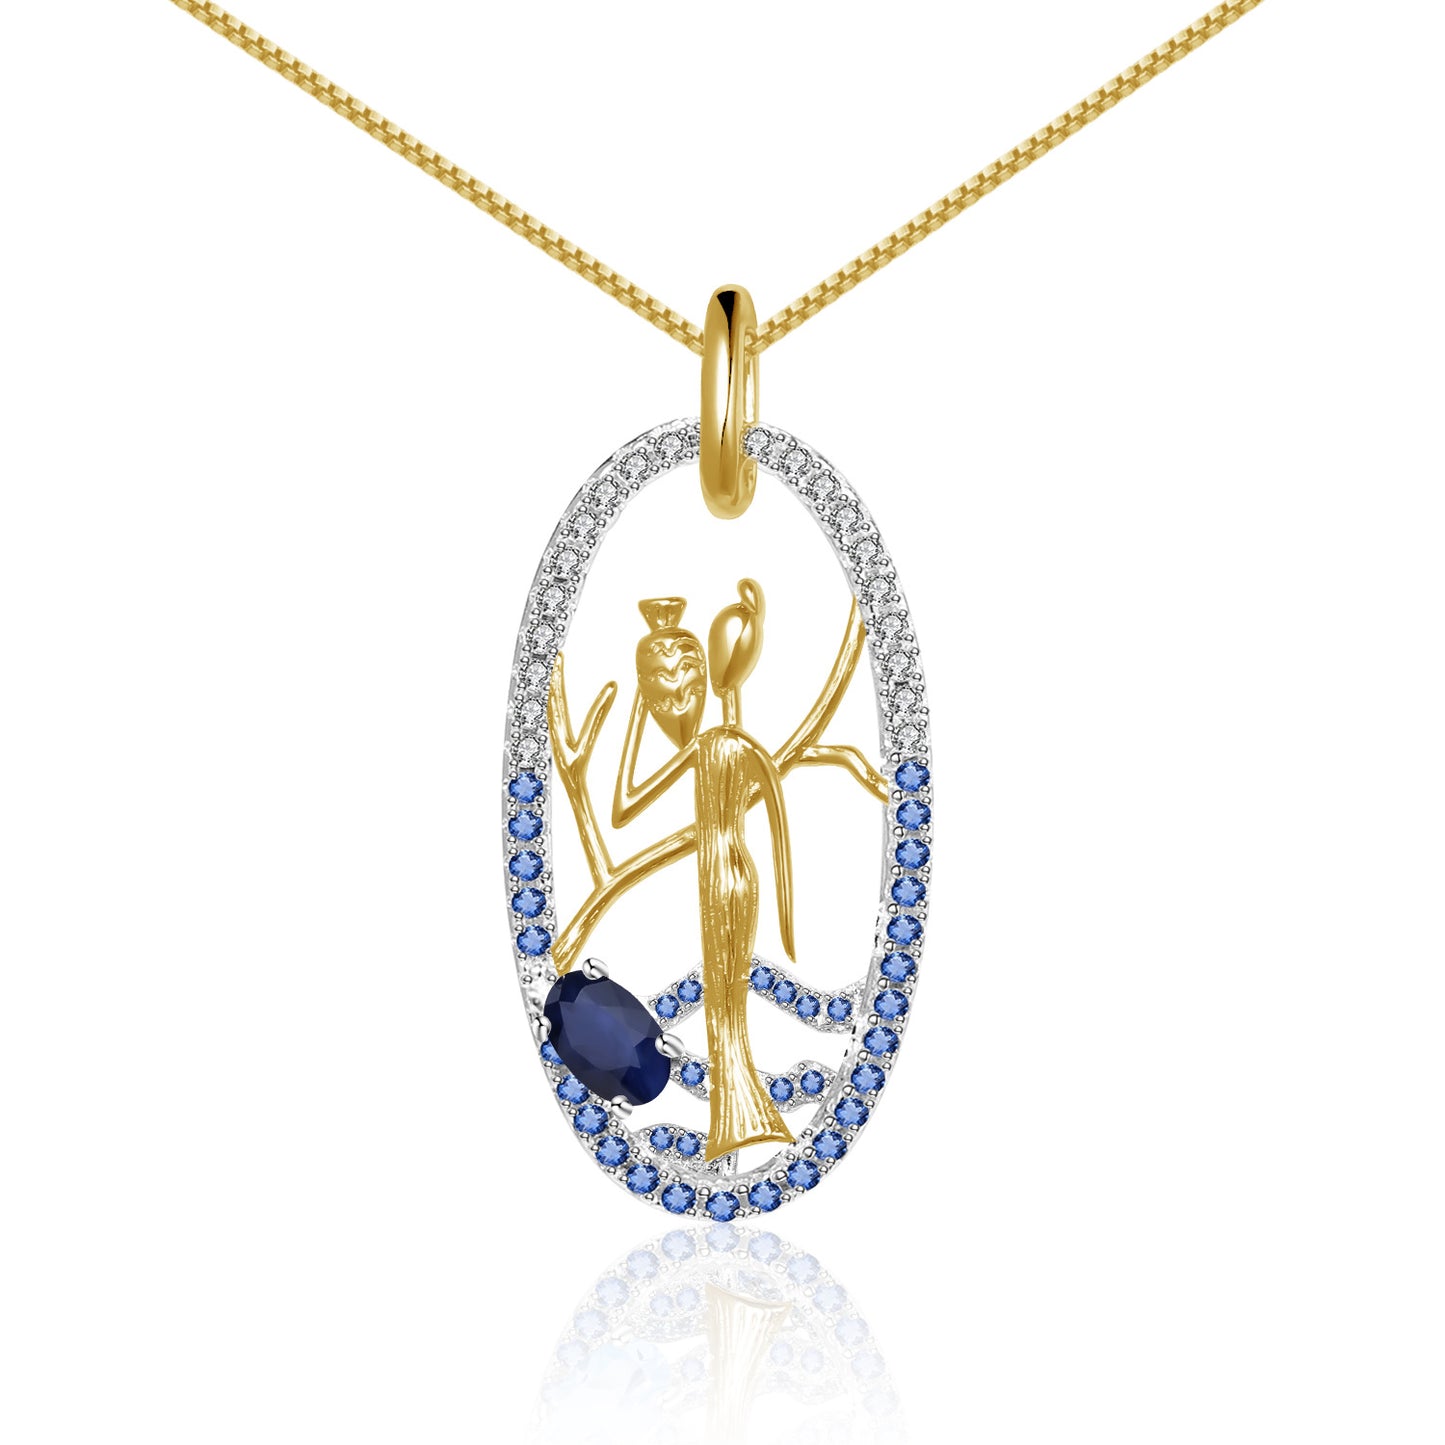 Personality Design Inlaid Colourful Gemstone The Women Tops The Vat Oval Pendant Silver Necklace for Women